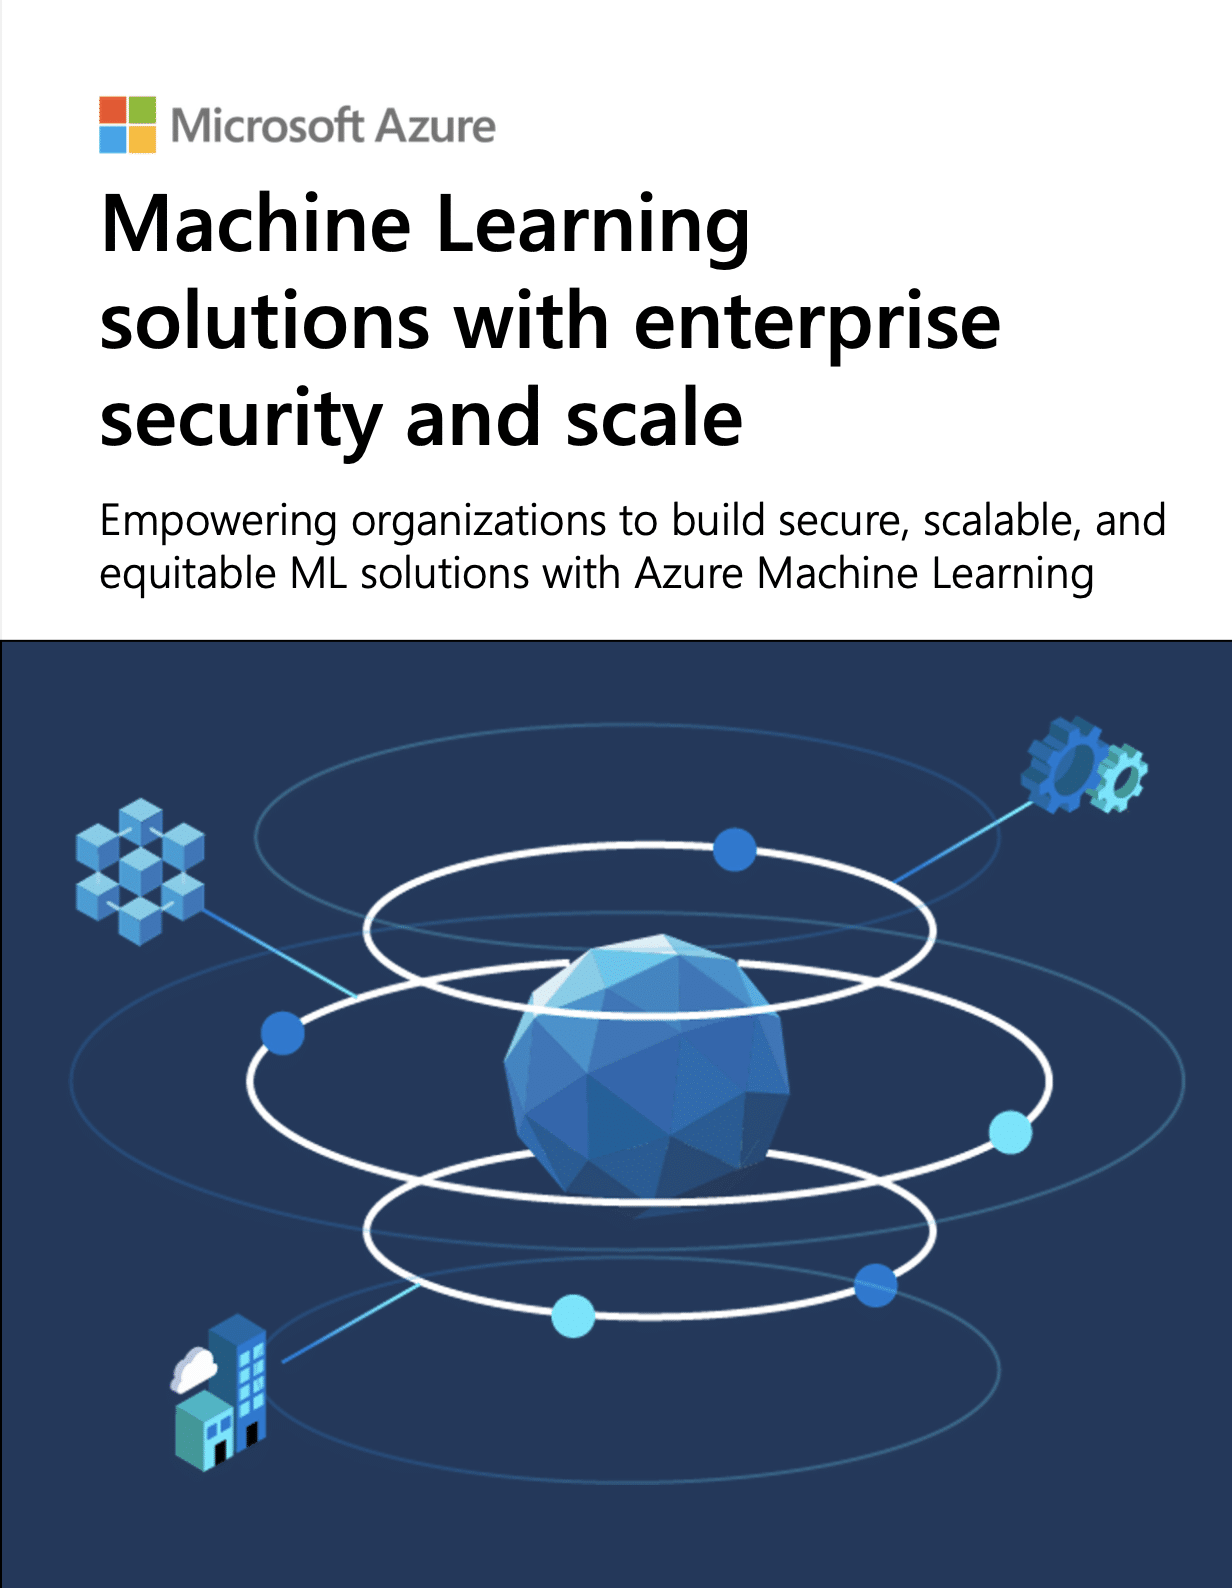 Machine Learning Solutions With Enterprise Security and Scale 8